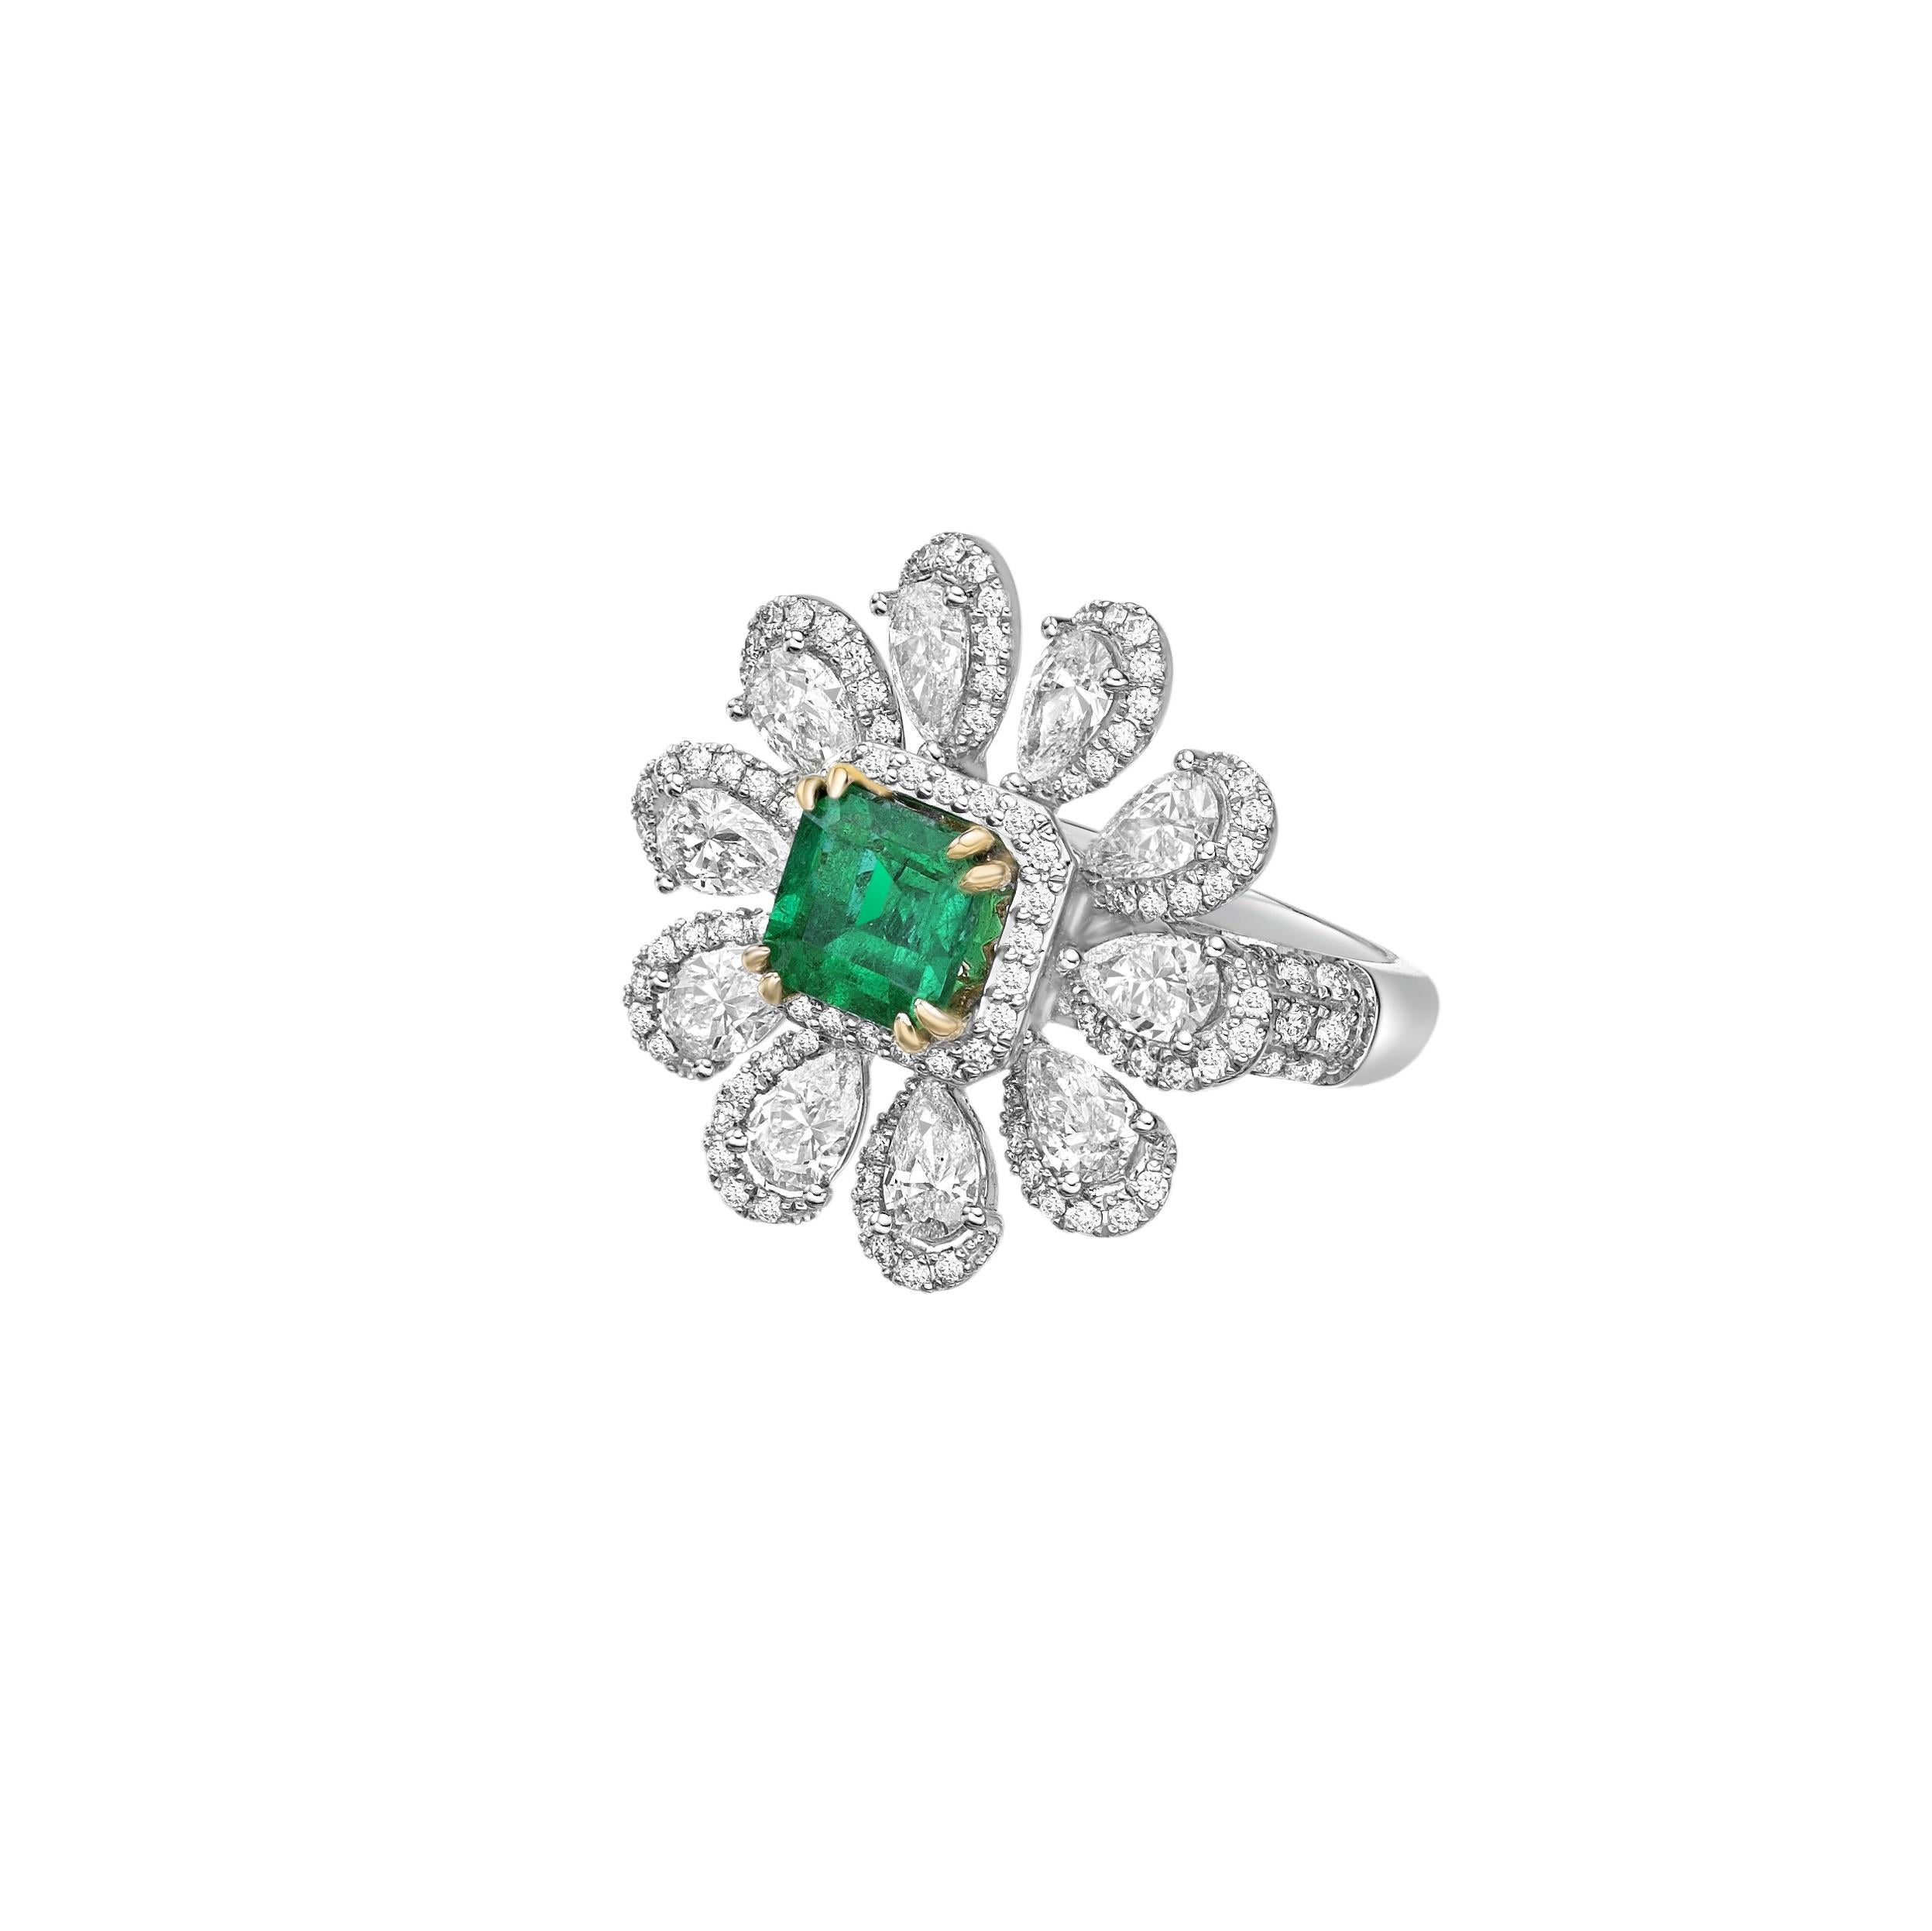 Octagon Cut 1.28 Carat Sunflower Emerald Bridal Ring in 18KWYG with White Diamond. For Sale